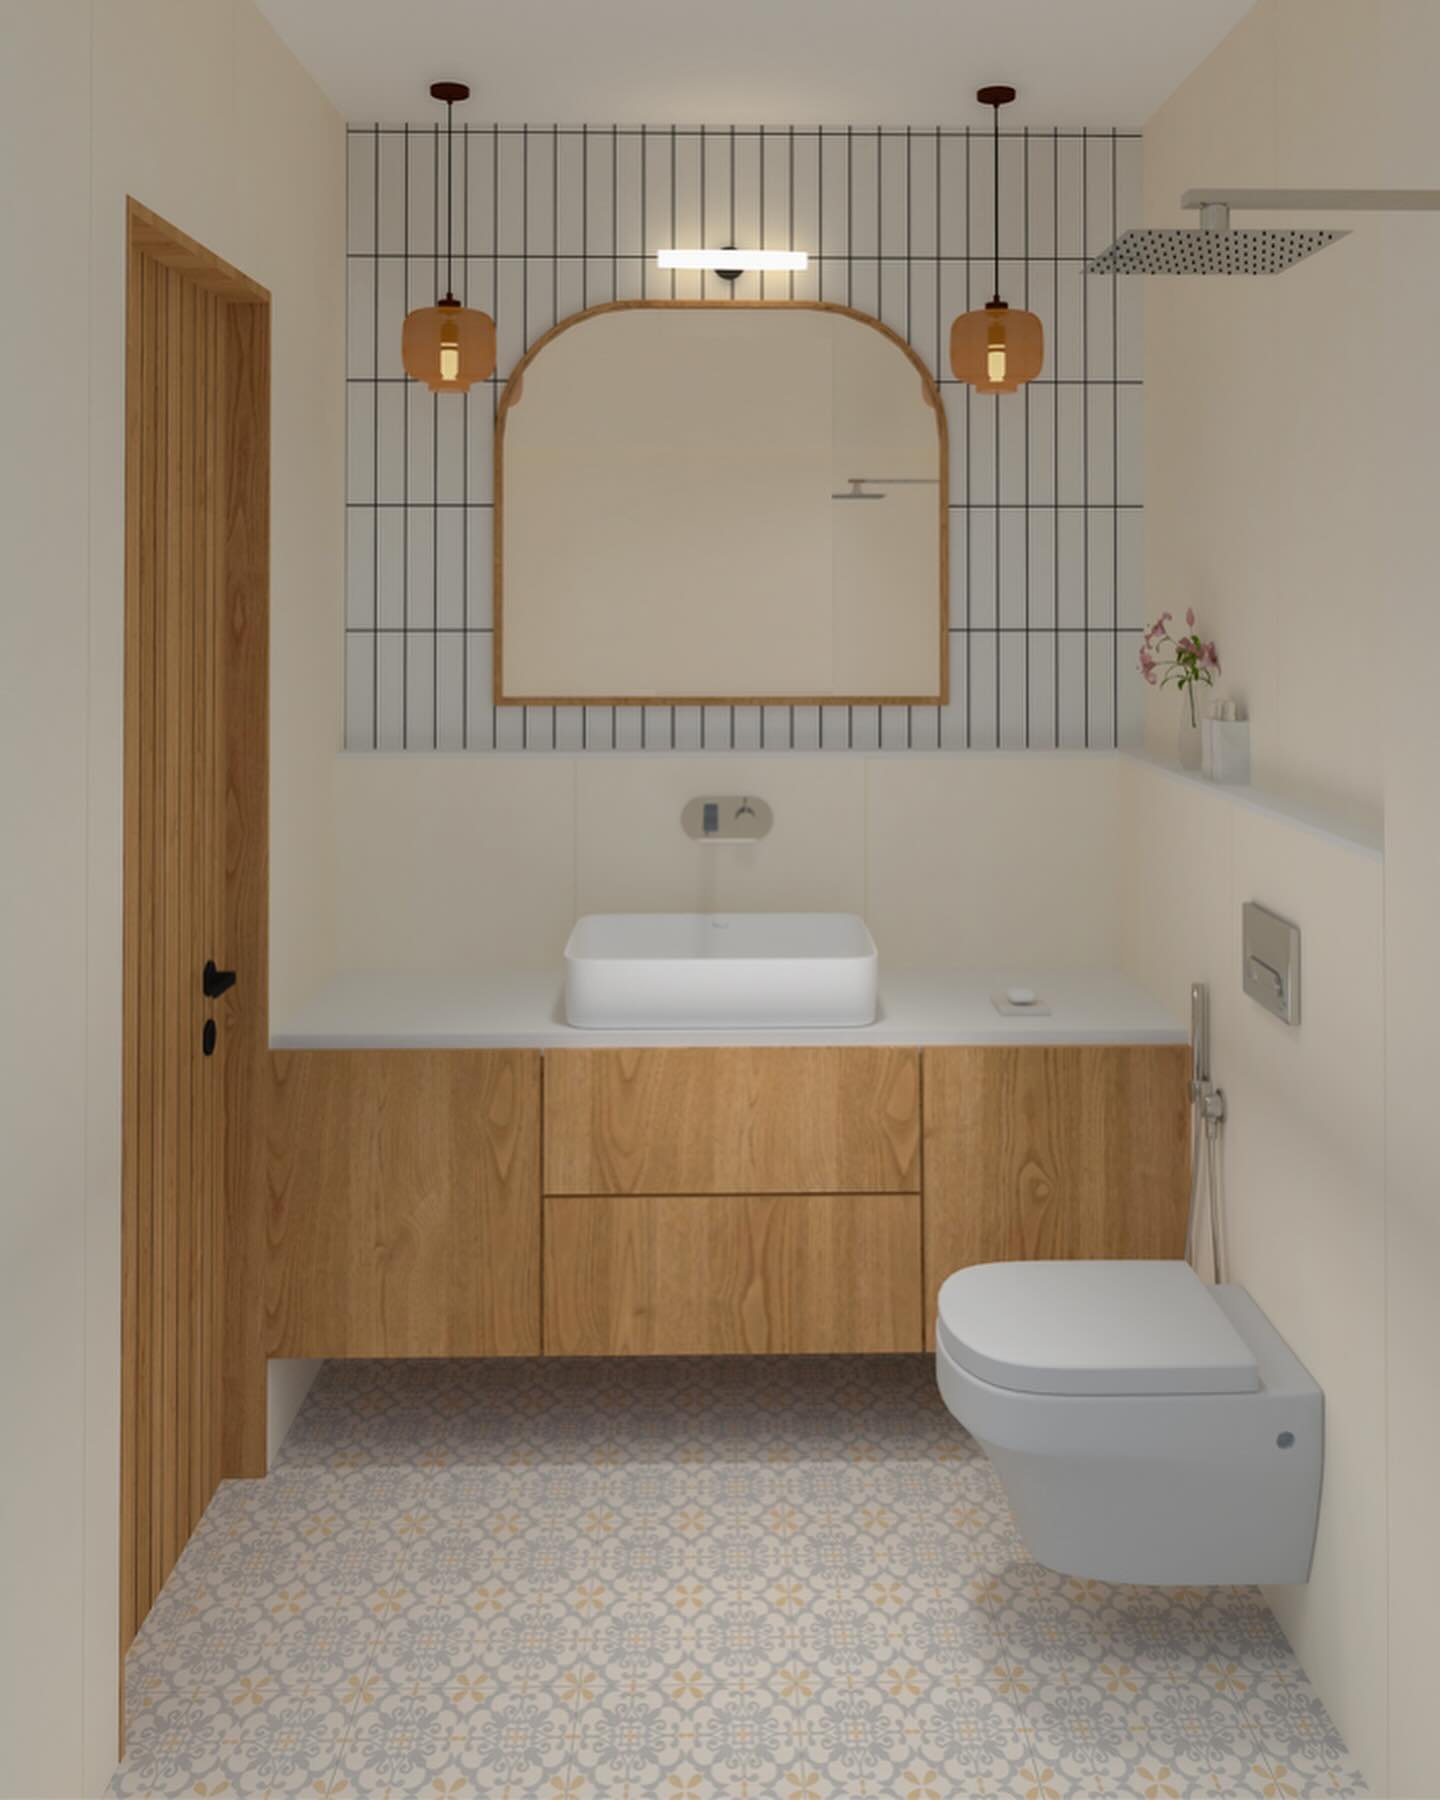 Our beautiful bathroom design concepts for an upcoming residence project. 🤩

1. Master bathroom - Planned a patterned floor tile, with a complementary beige wall tile. White subway tiles act as the backdrop for the vanity. 

2. En-suite and guest ba